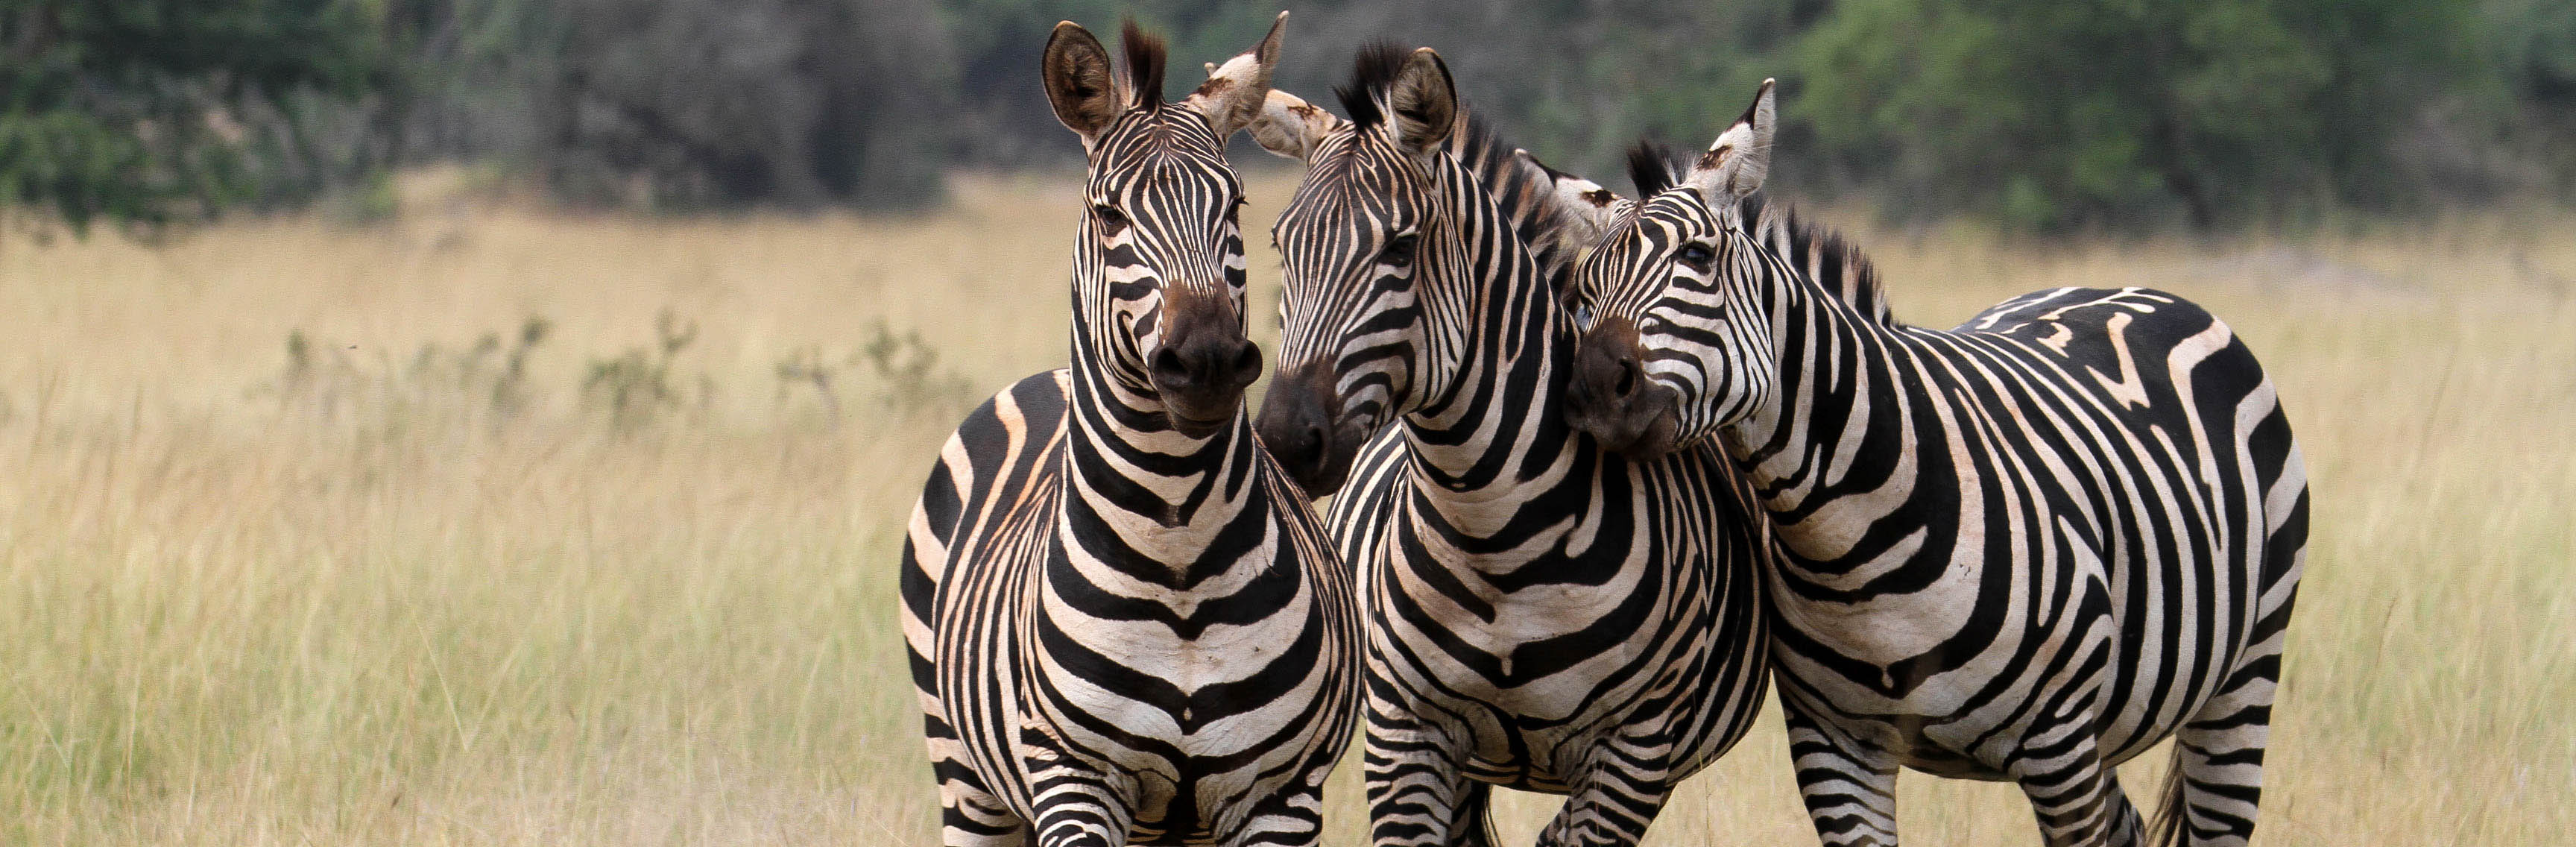 Zebra in Akagera National Park | Sarah Hall of African Parks